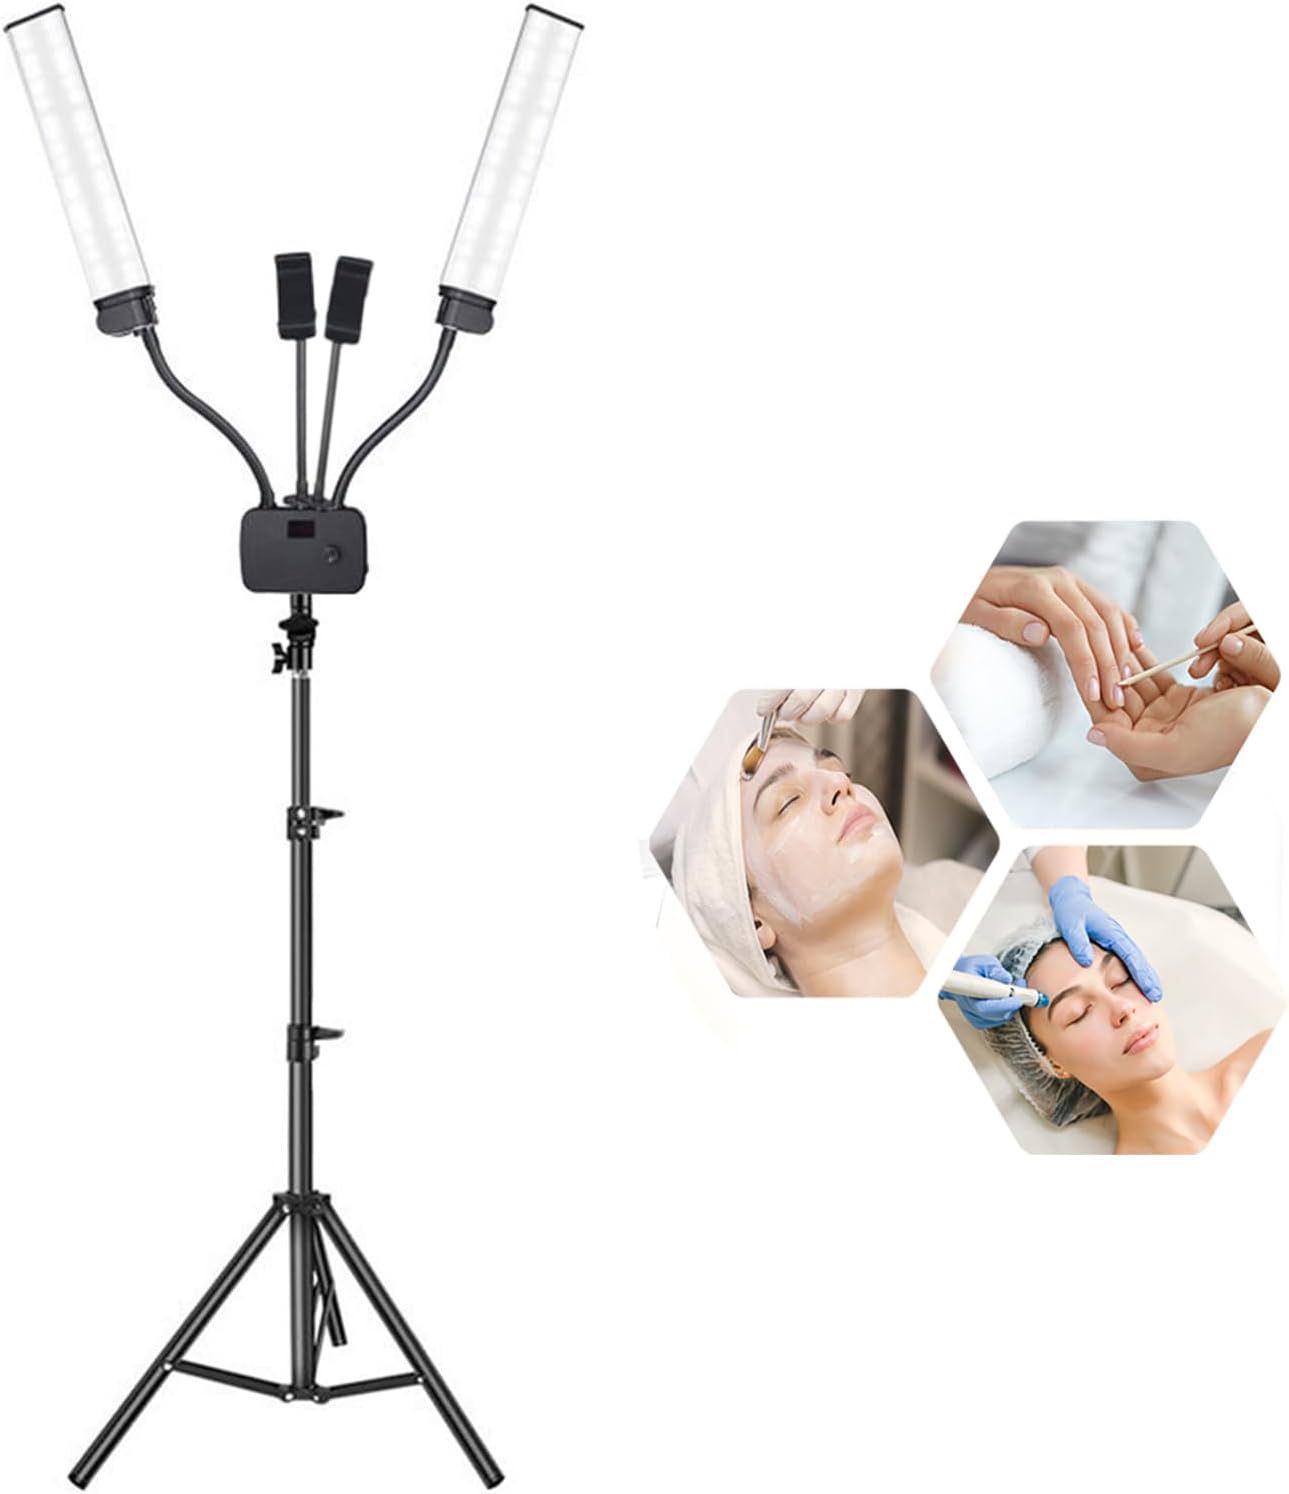 Selfie Floor Lamp for Eyelash Extensions with Tripod Stand and Phone Holder, Portable Tattoo Lash Light for Makeup